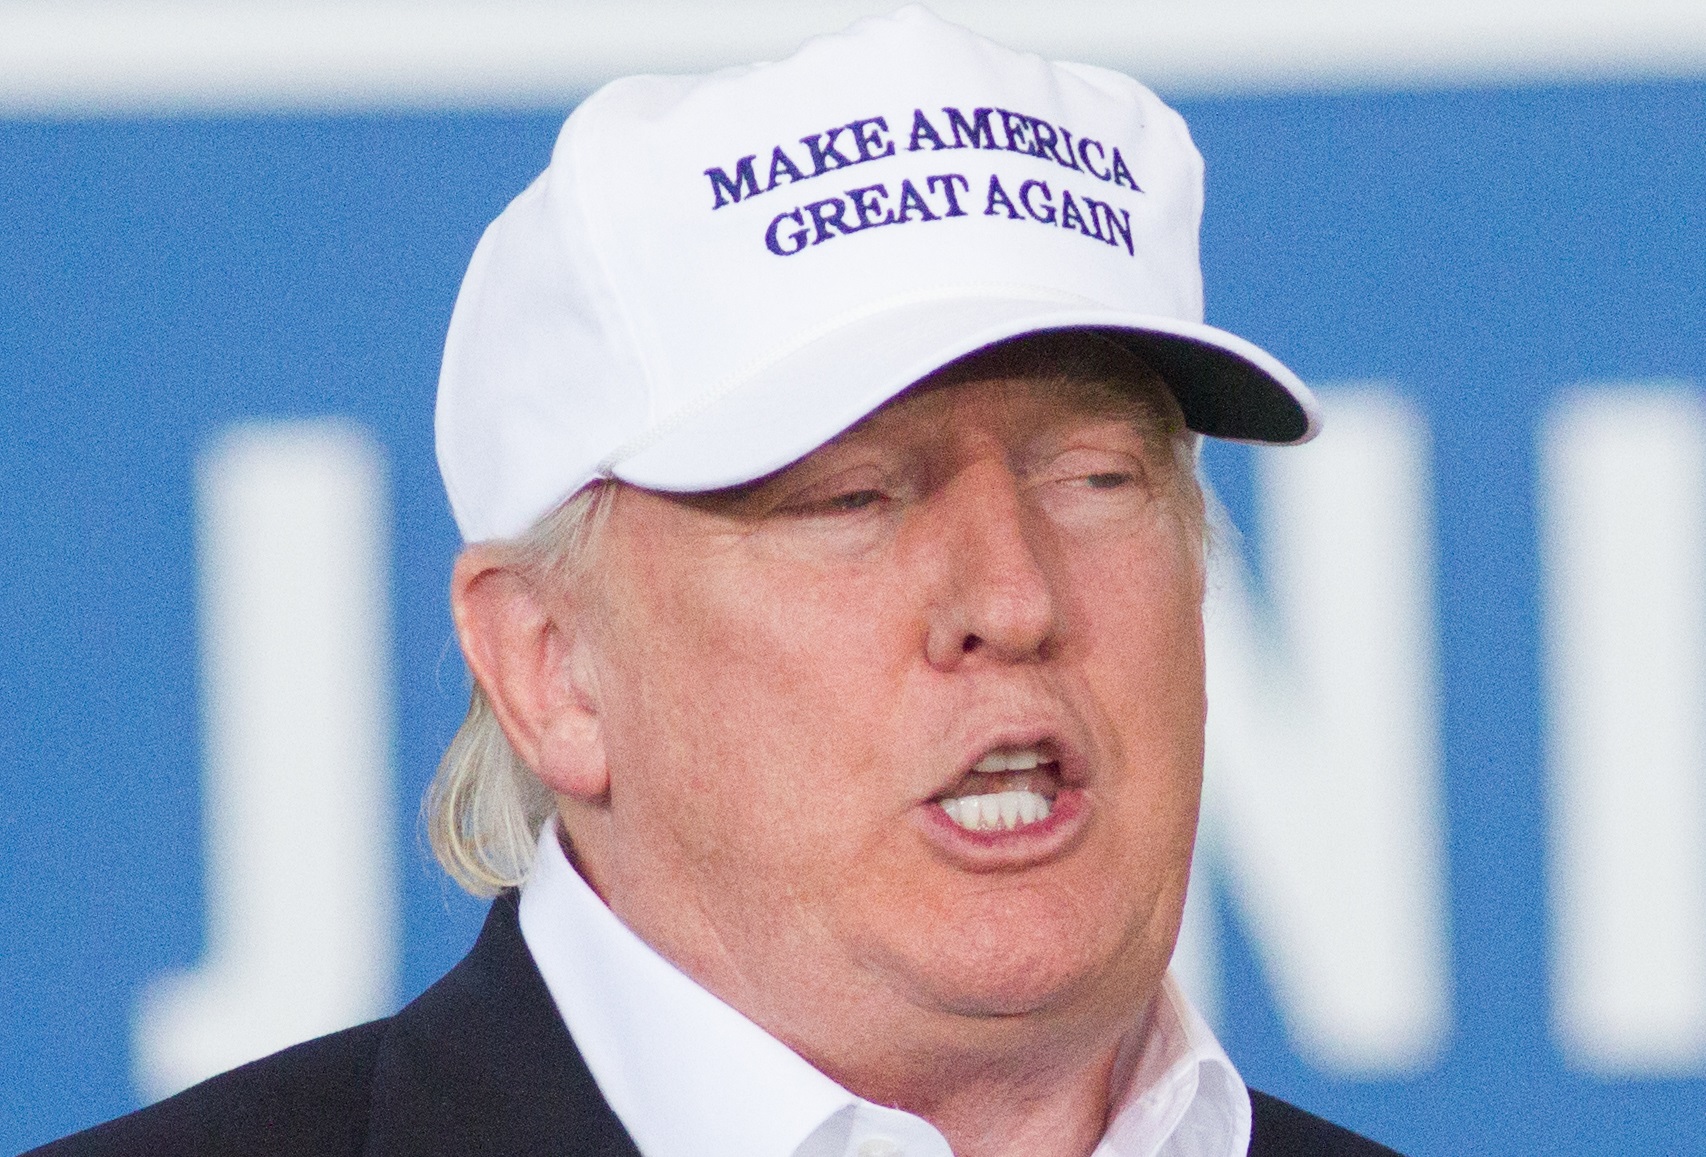 <p>"Make America Great Again" was associated with Donald Trump's 2016 campaign, and it resonated with disenchanted citizens longing for change. However, it also sparked debates on exclusivity, immigration, and race, revealing deep divisions both in American society and across the globe.</p>